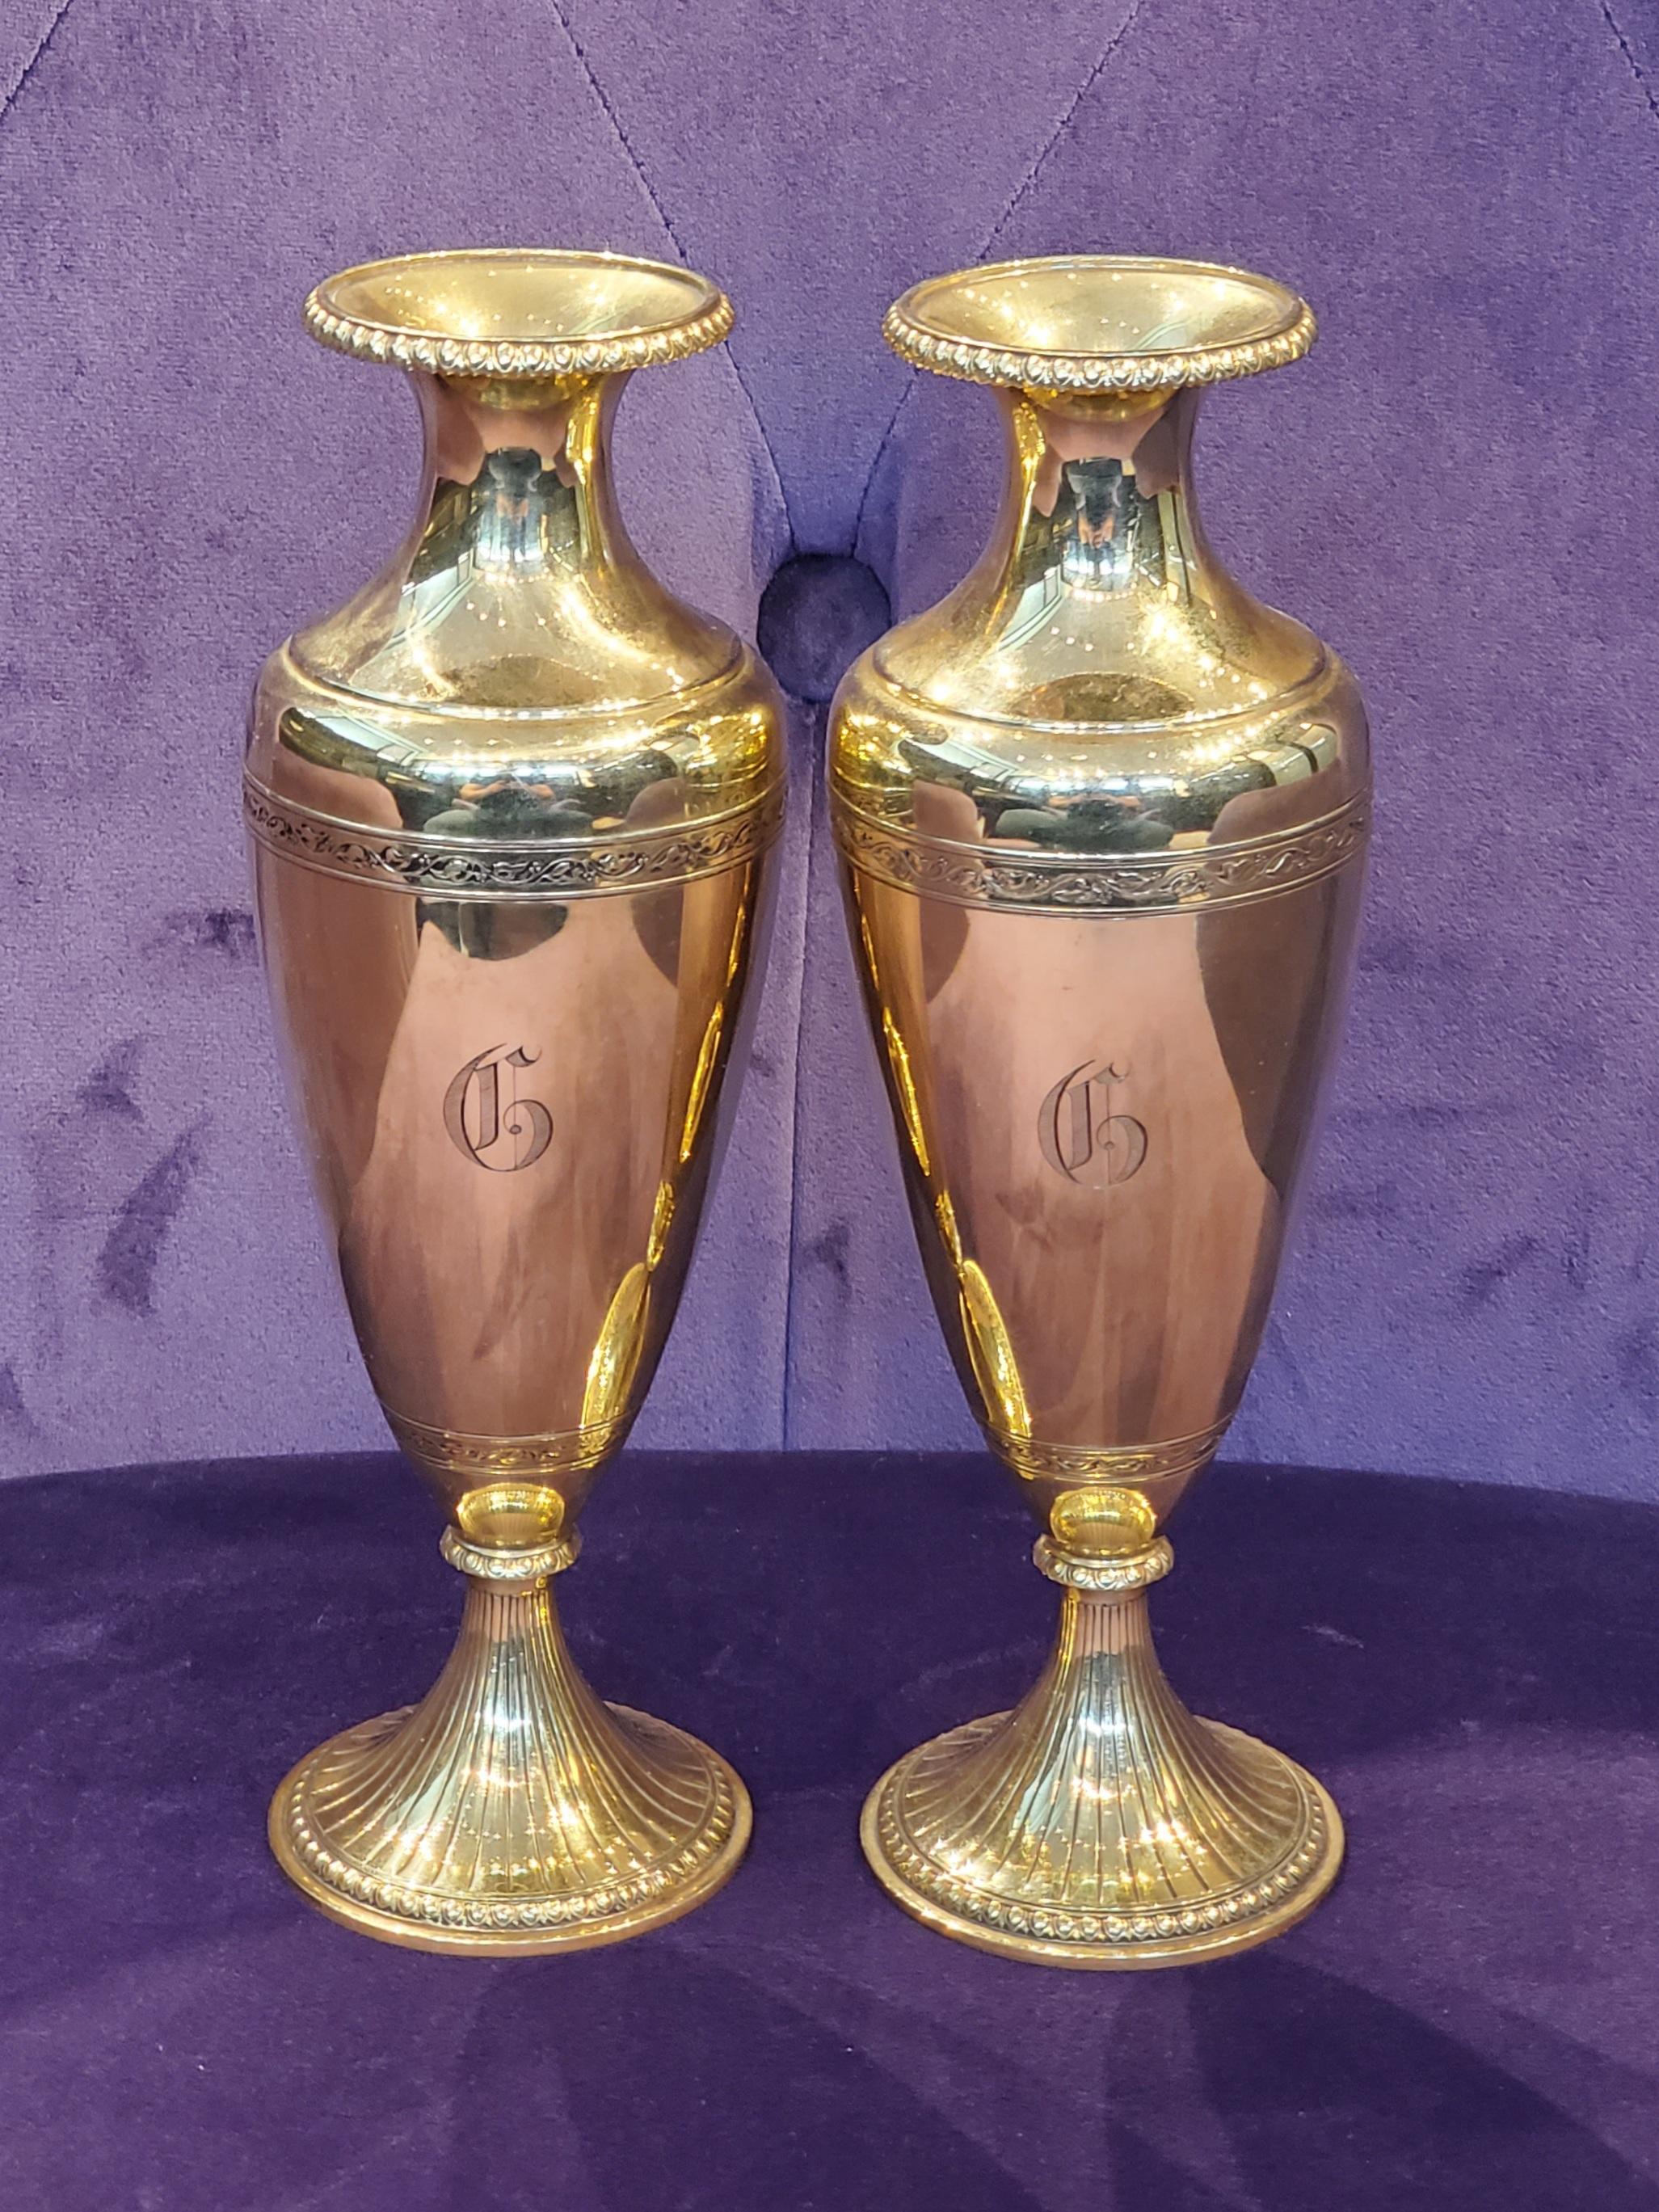 Pair of 14 karat gold flower vases

Dimensions: 
approximately 7.82 x 2.75

Weight: 464.1 grams.

 